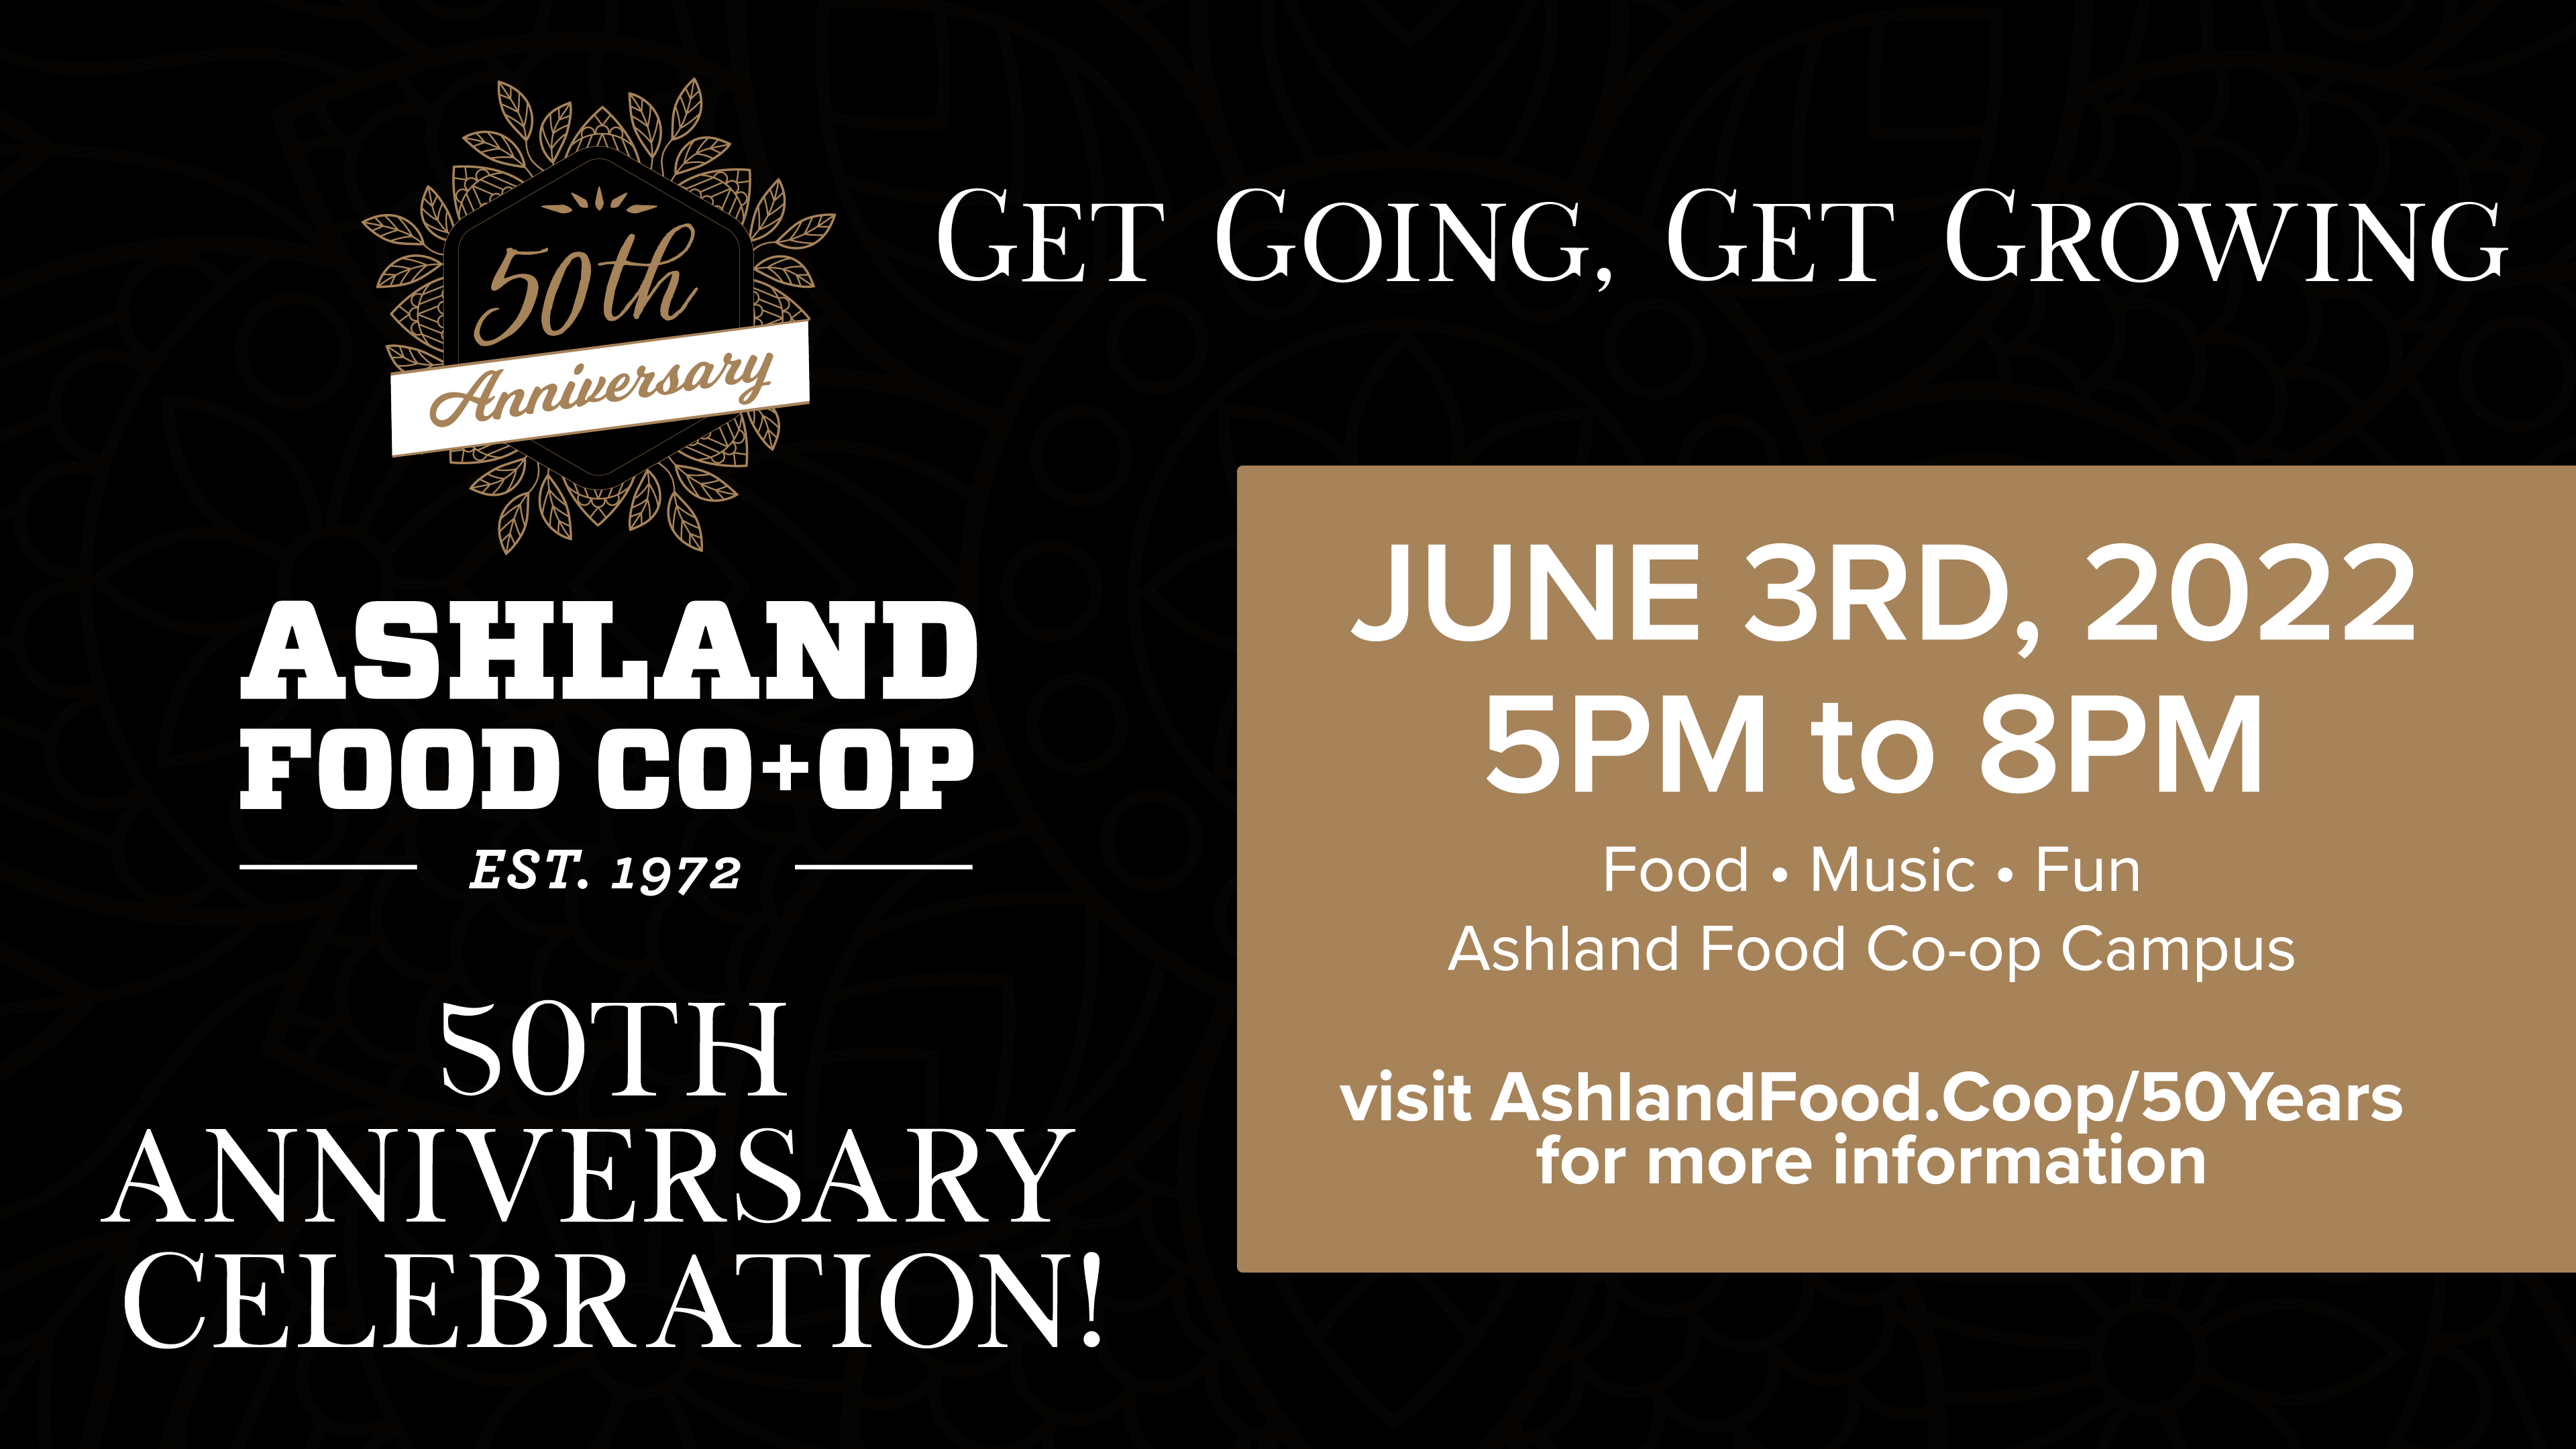 Join us on June 3rd to celebrate Ashland Food Co-op's 50th Anniversary